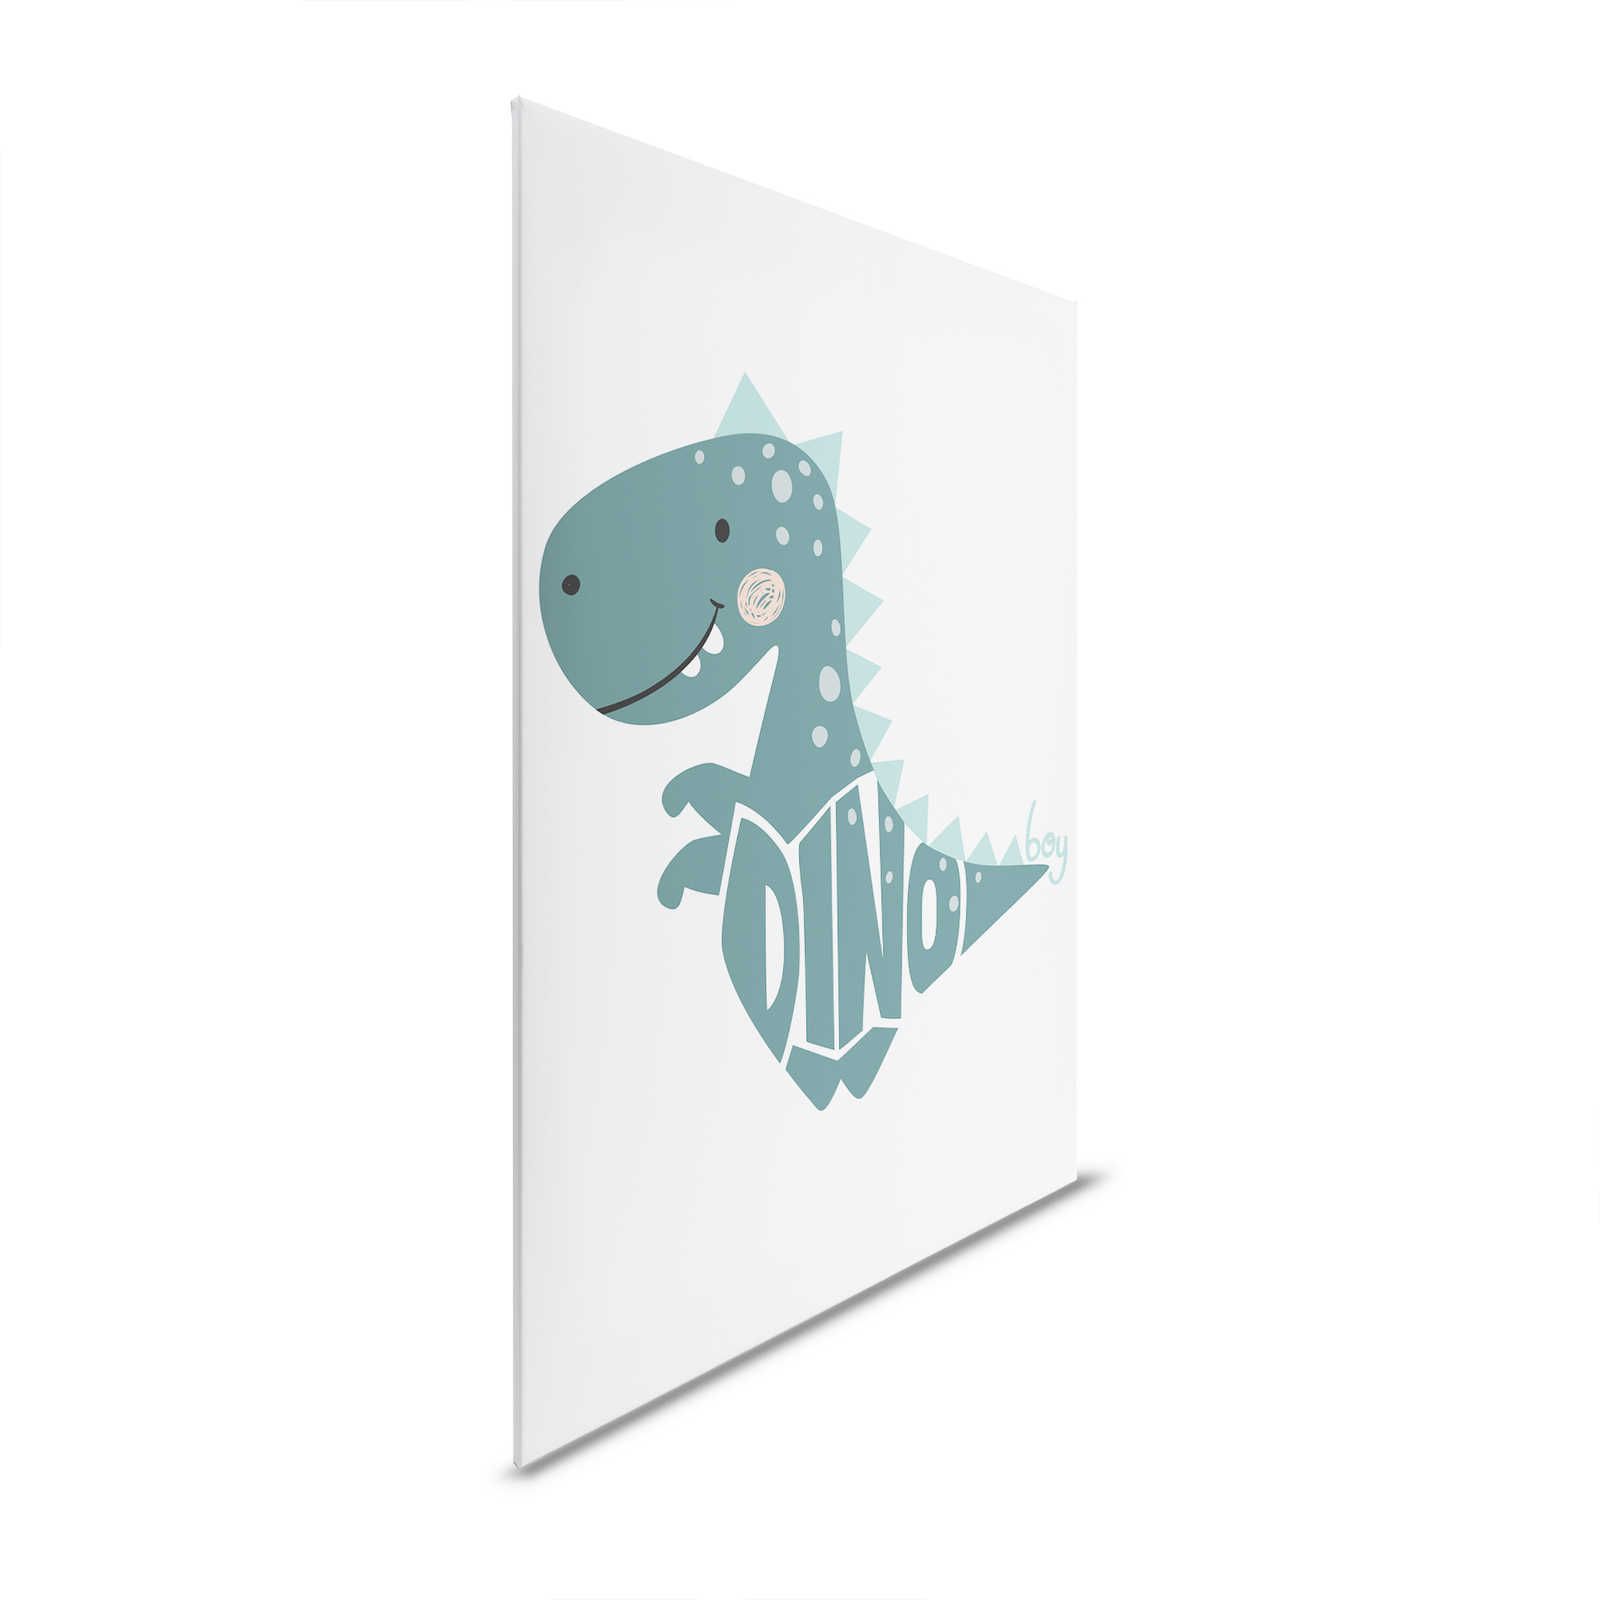         Canvas for children's room with dinosaur - 120 cm x 80 cm
    